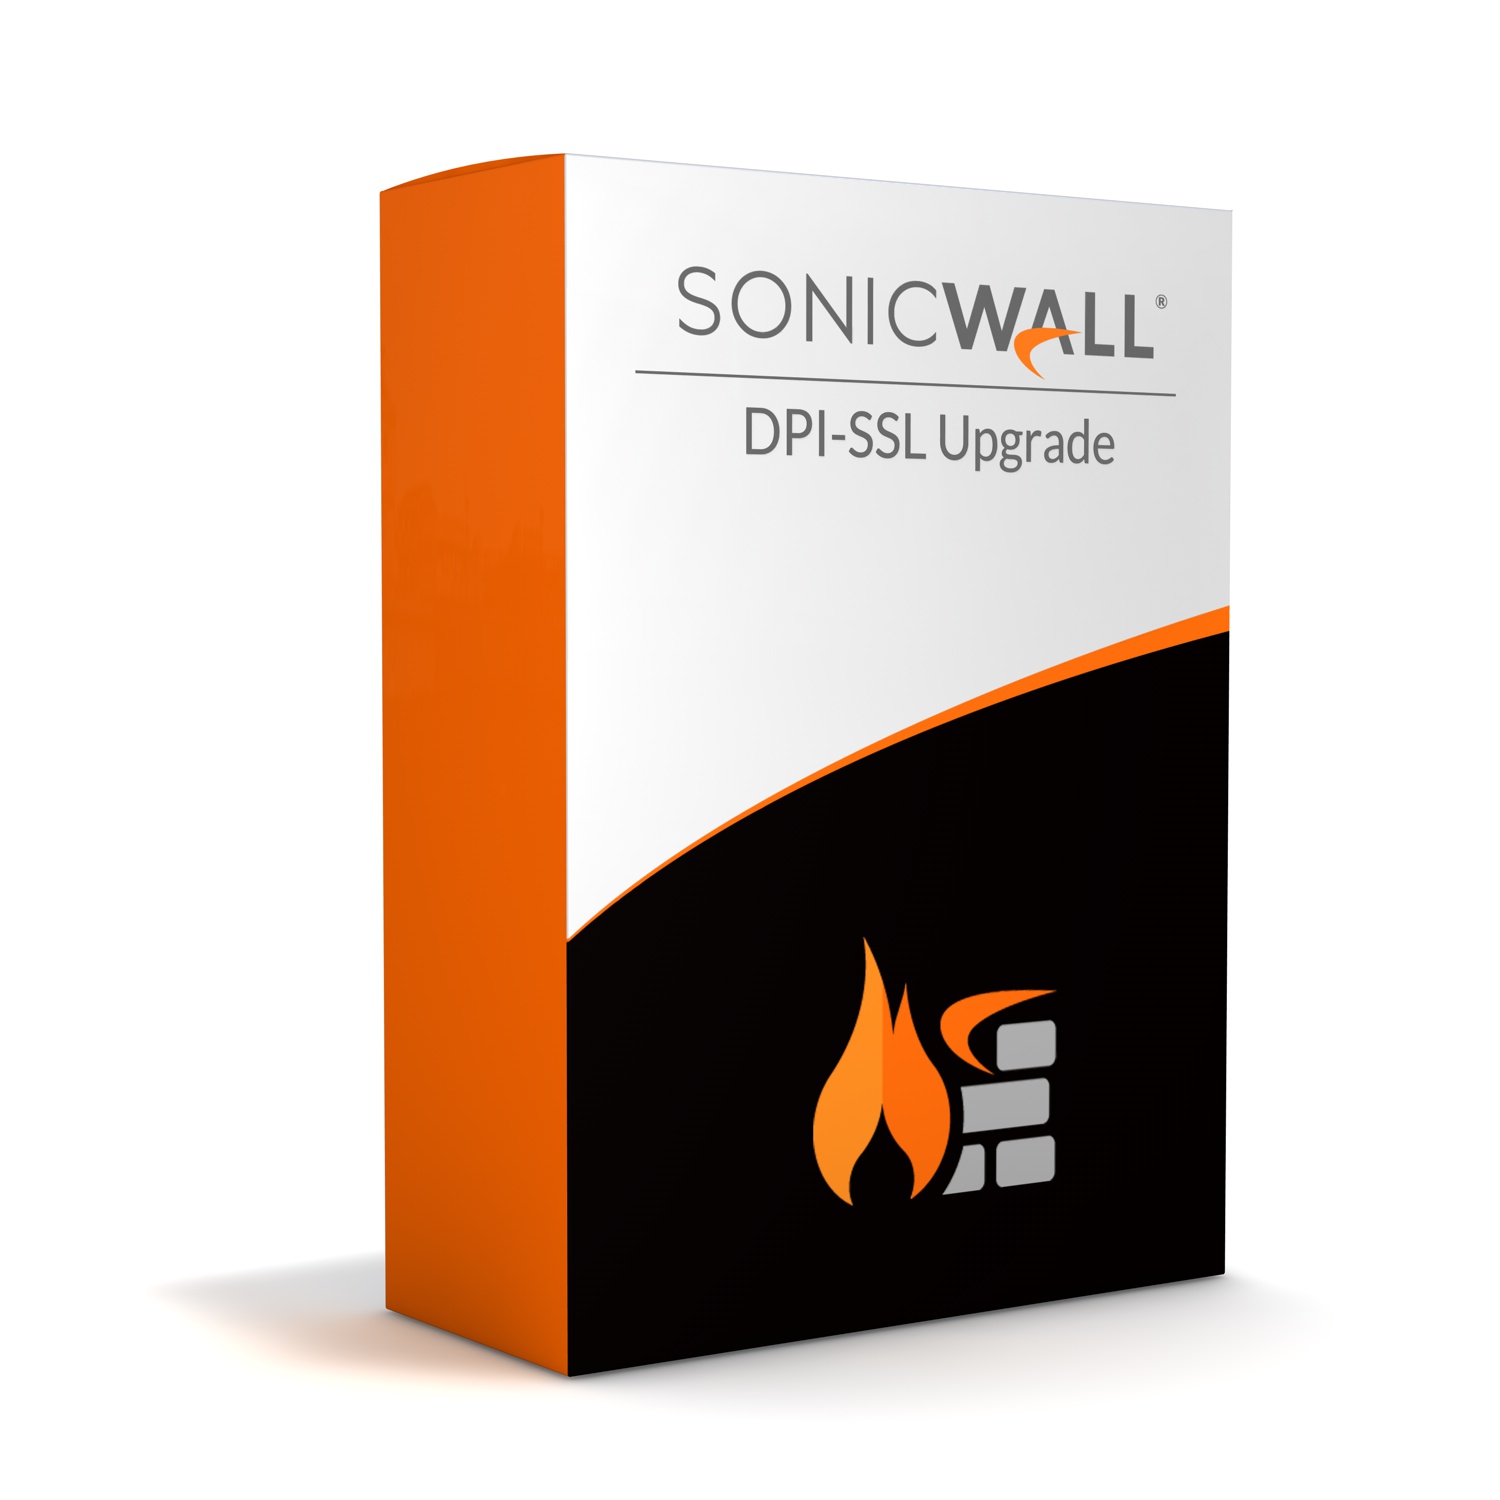 deep packet inspection engine sonicwall vpn